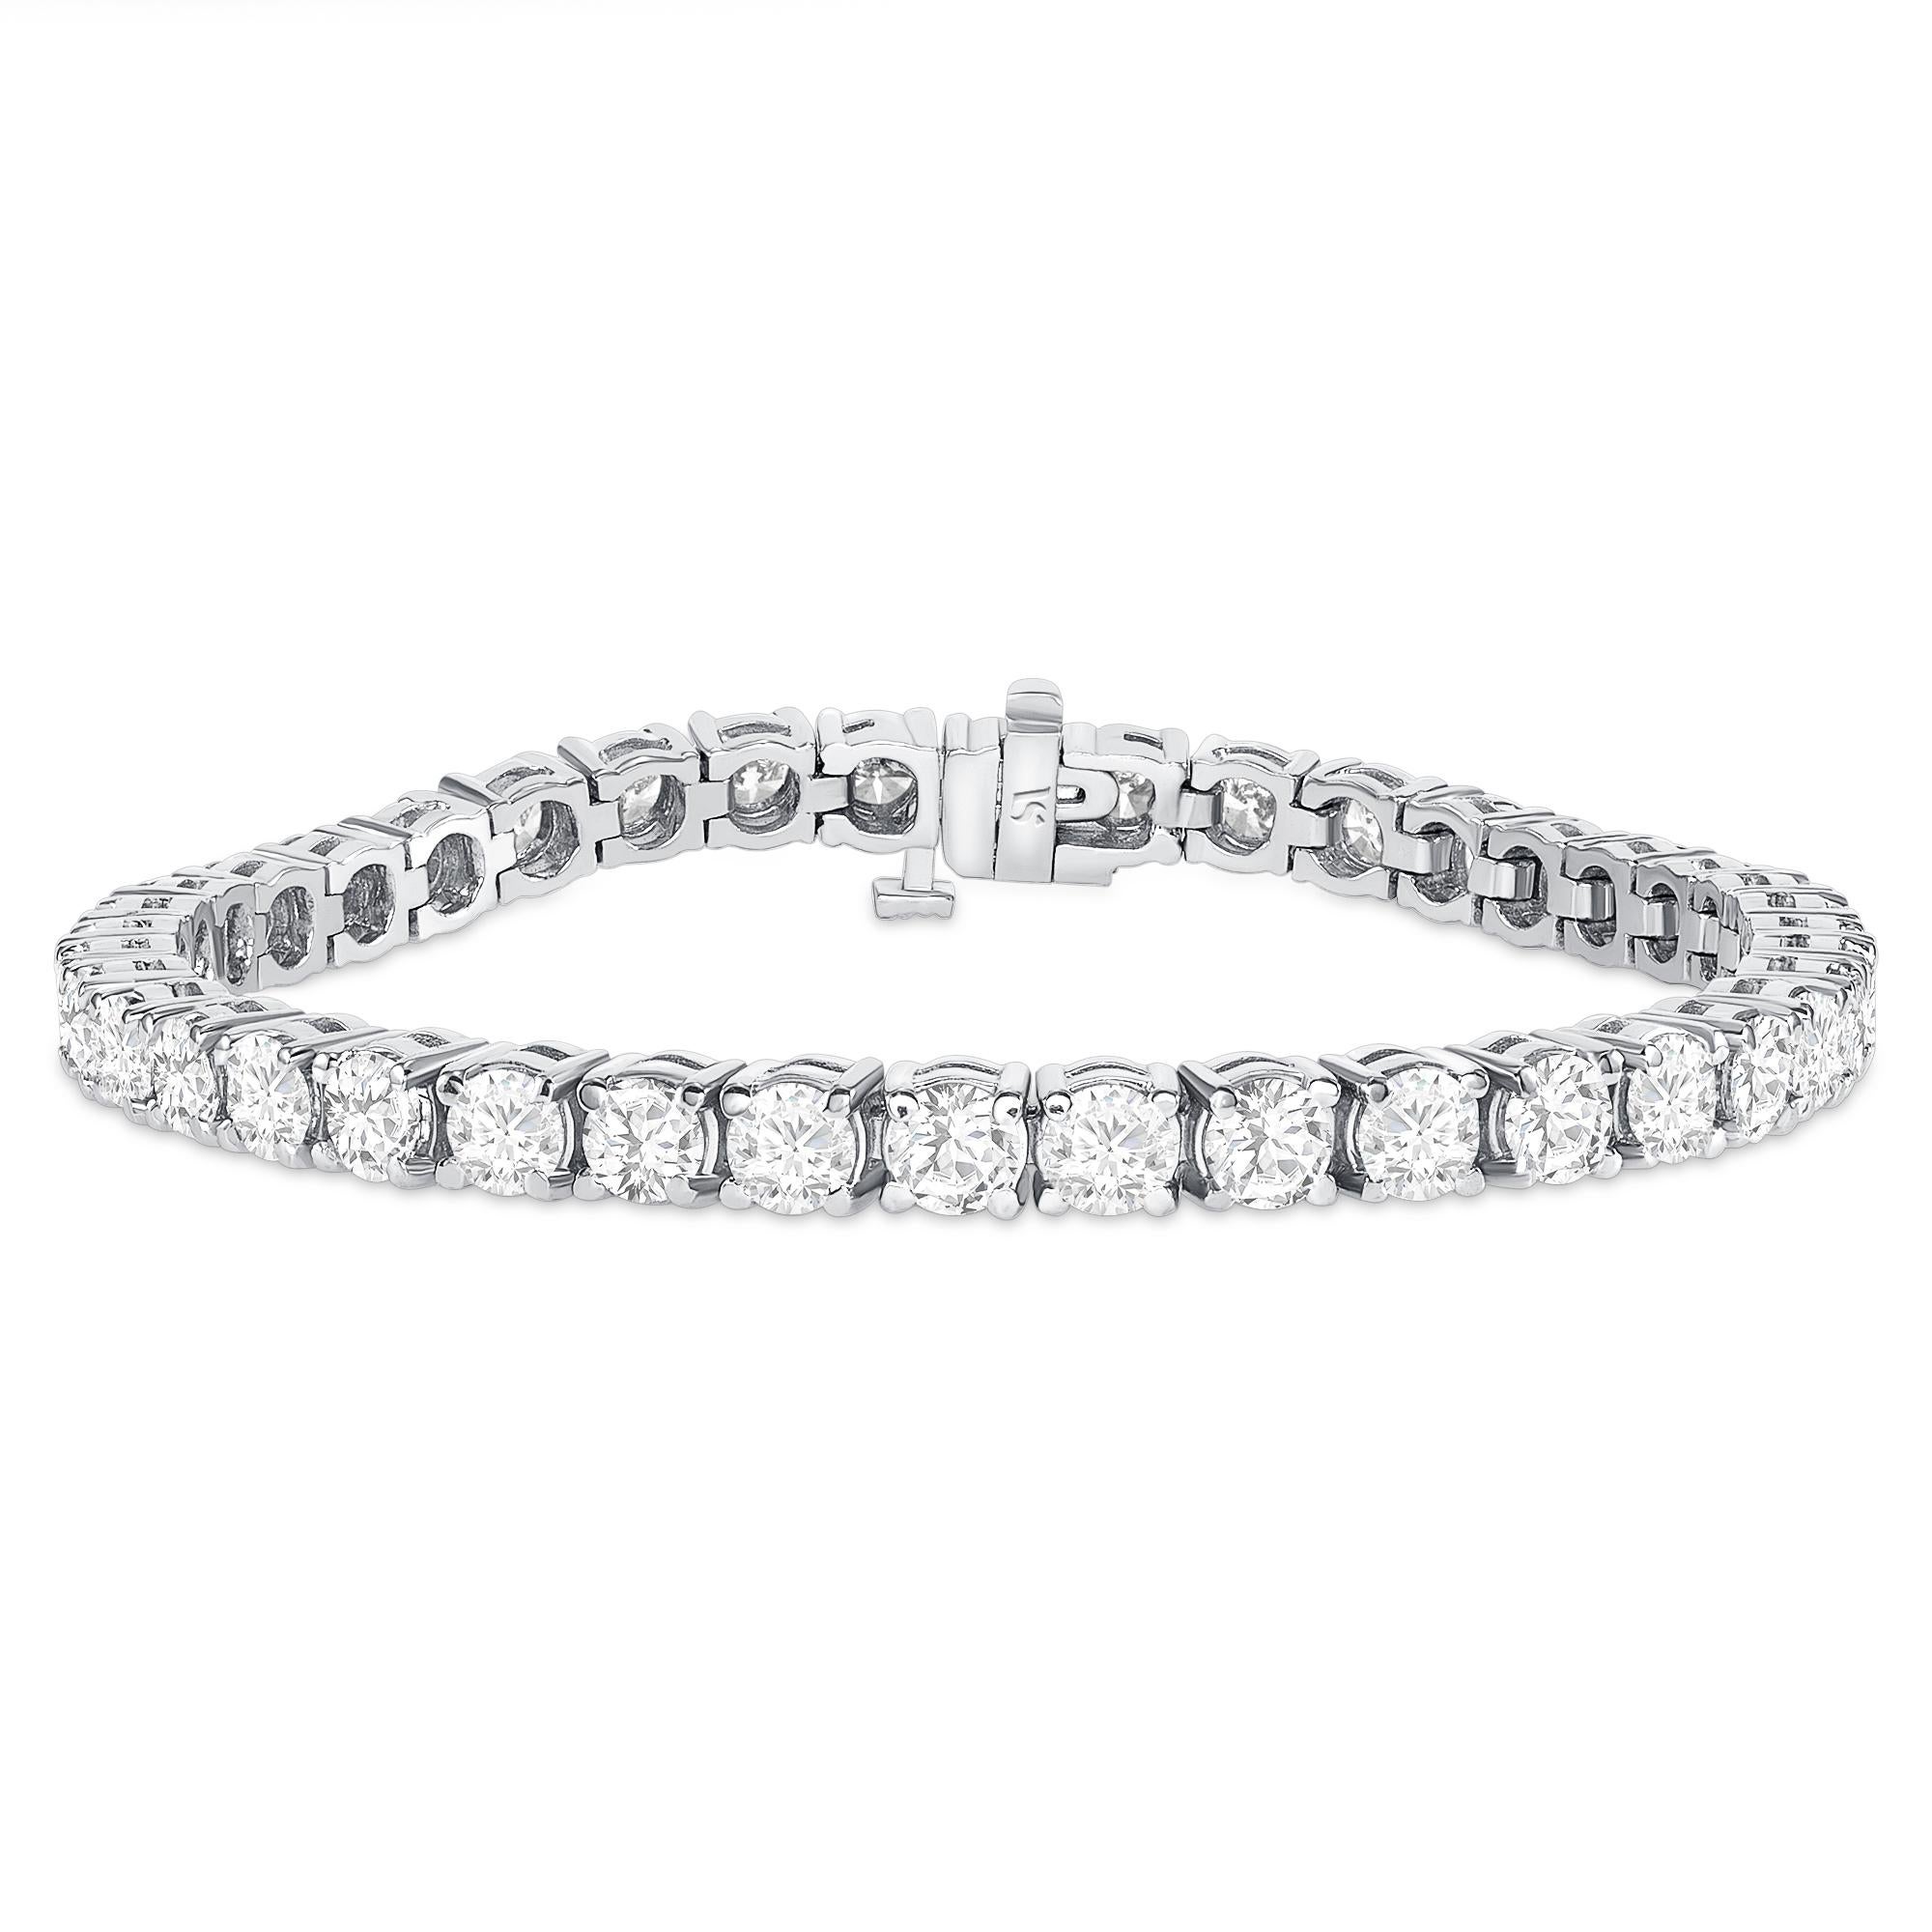 14K Solid Gold 11 cT Tennis Round Diamond Bracelet

This diamond tennis bracelet features round cut diamonds embedded on the 14k gold bracelet. The unique diamond tennis bracelets also feature a push lock to adjust it according to your comfort. If